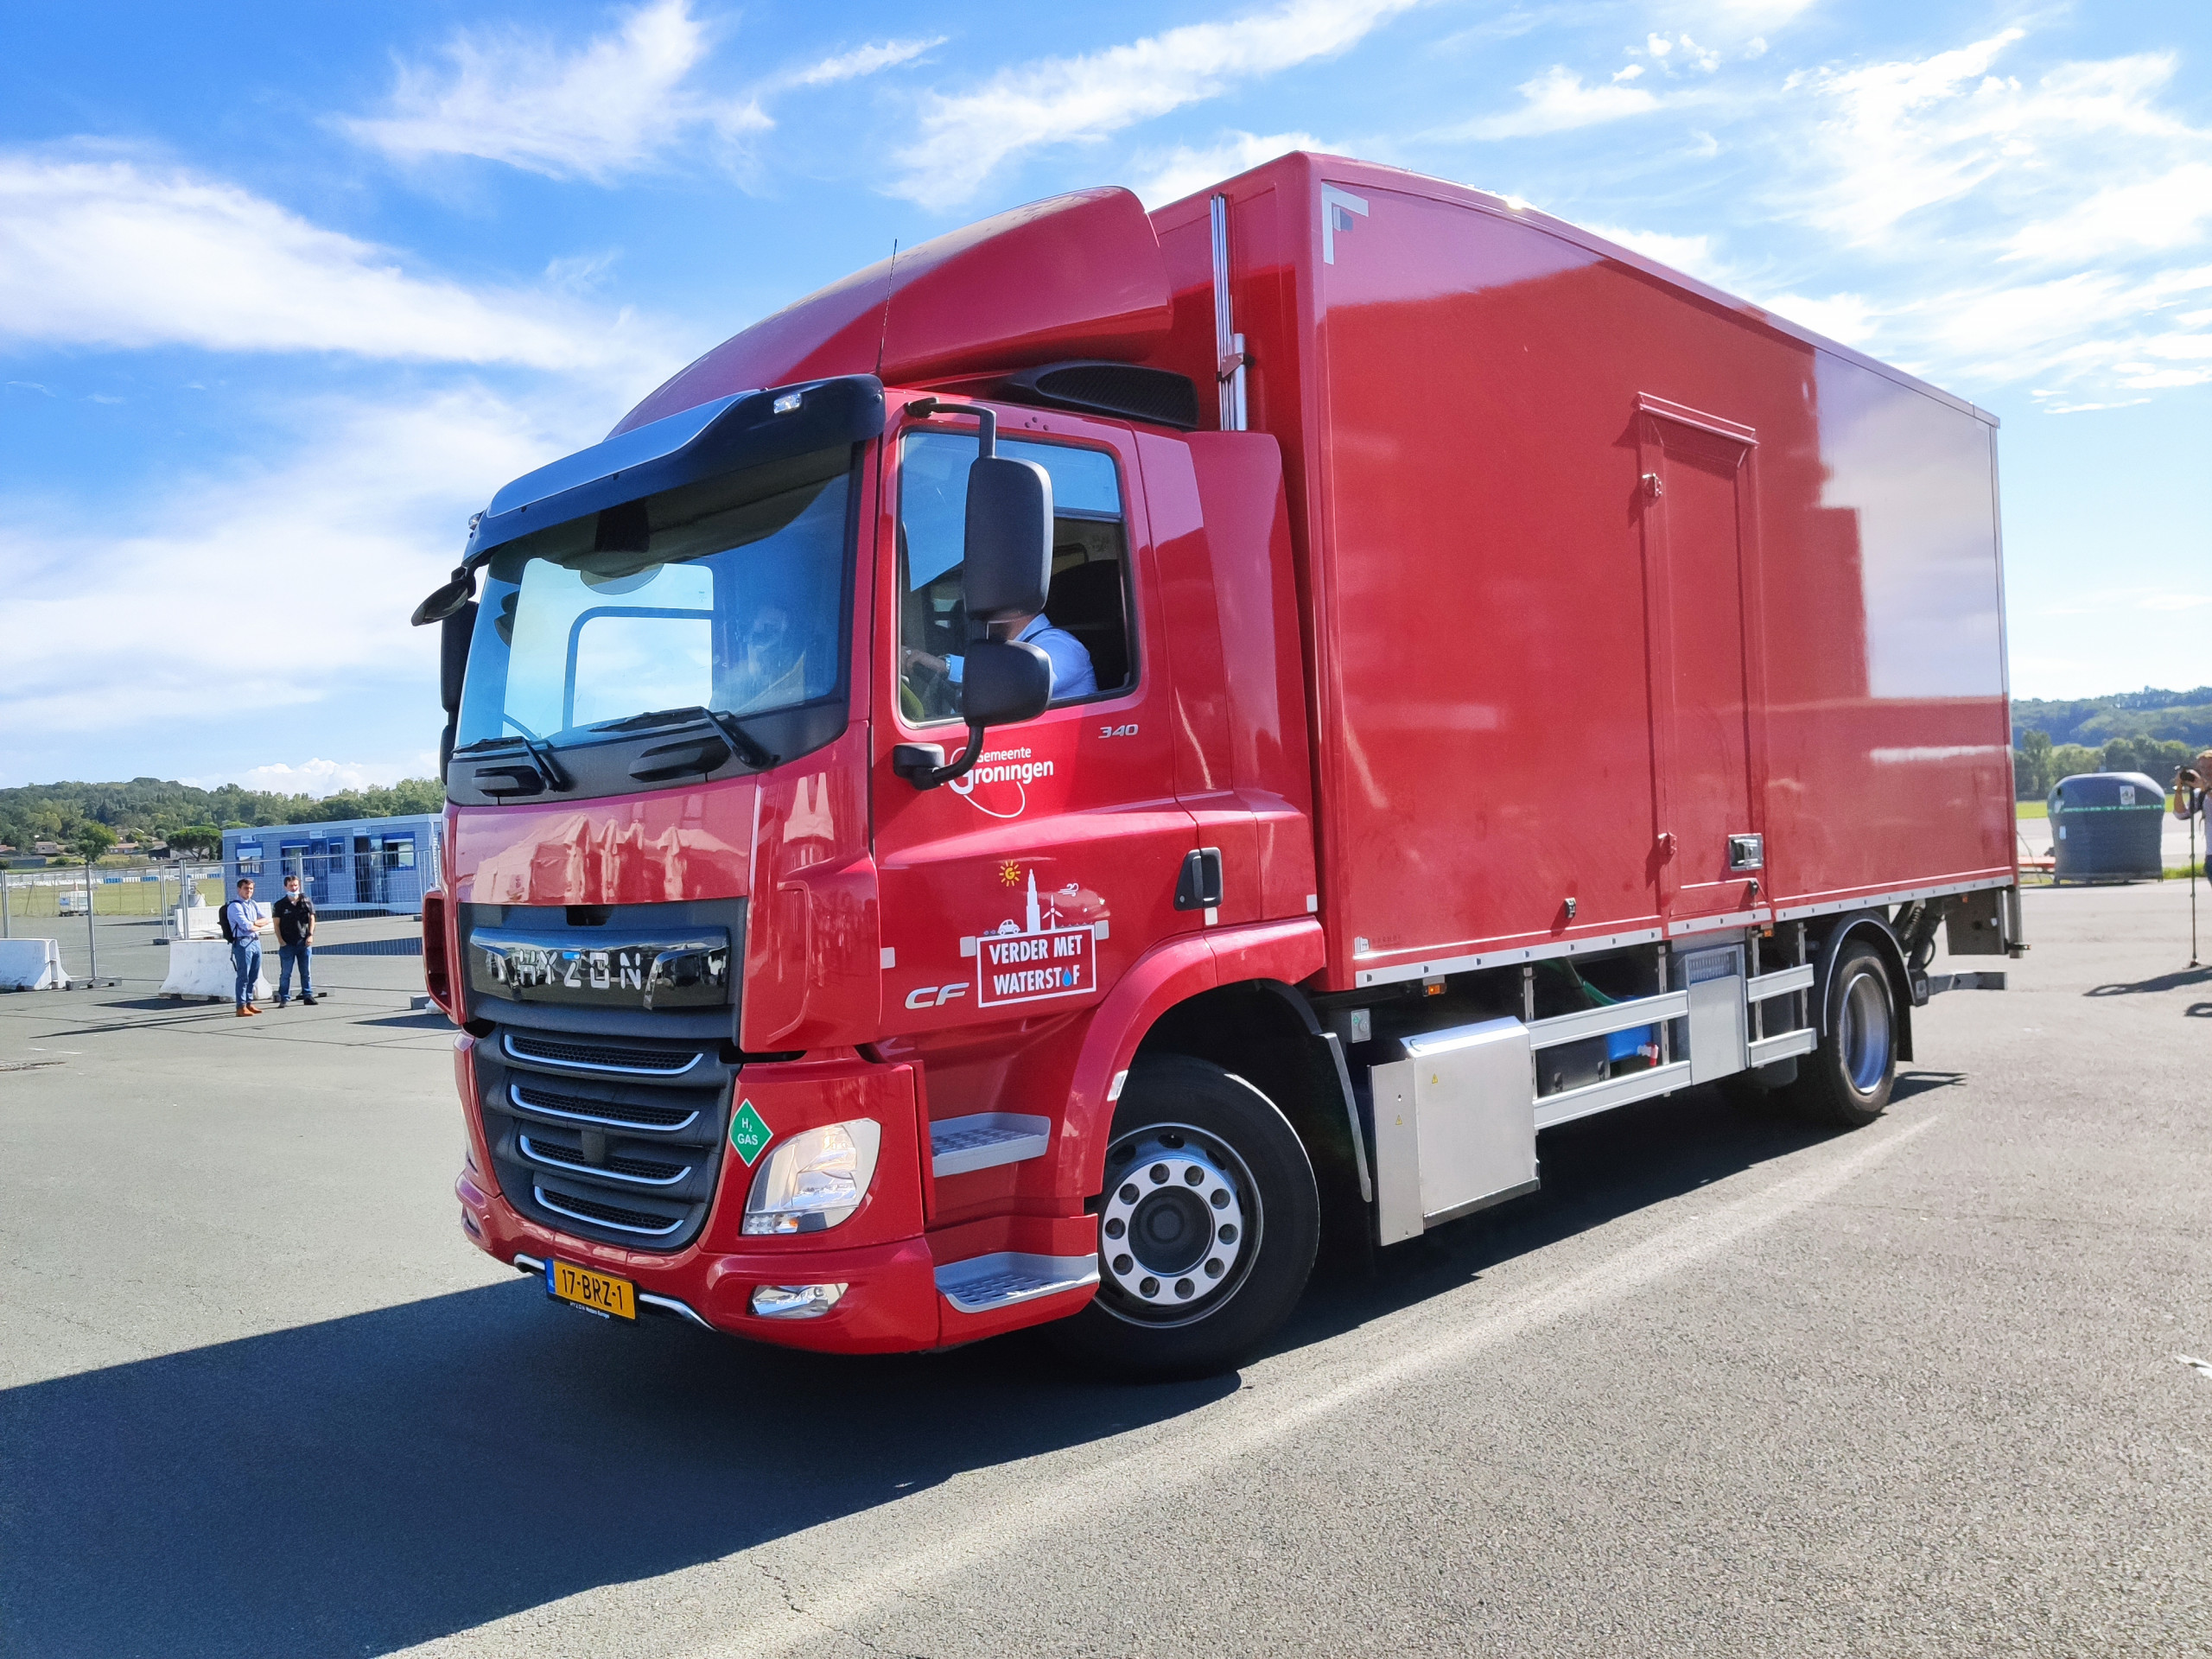 Read more about the article A hydrogen truck in public trials in Albi